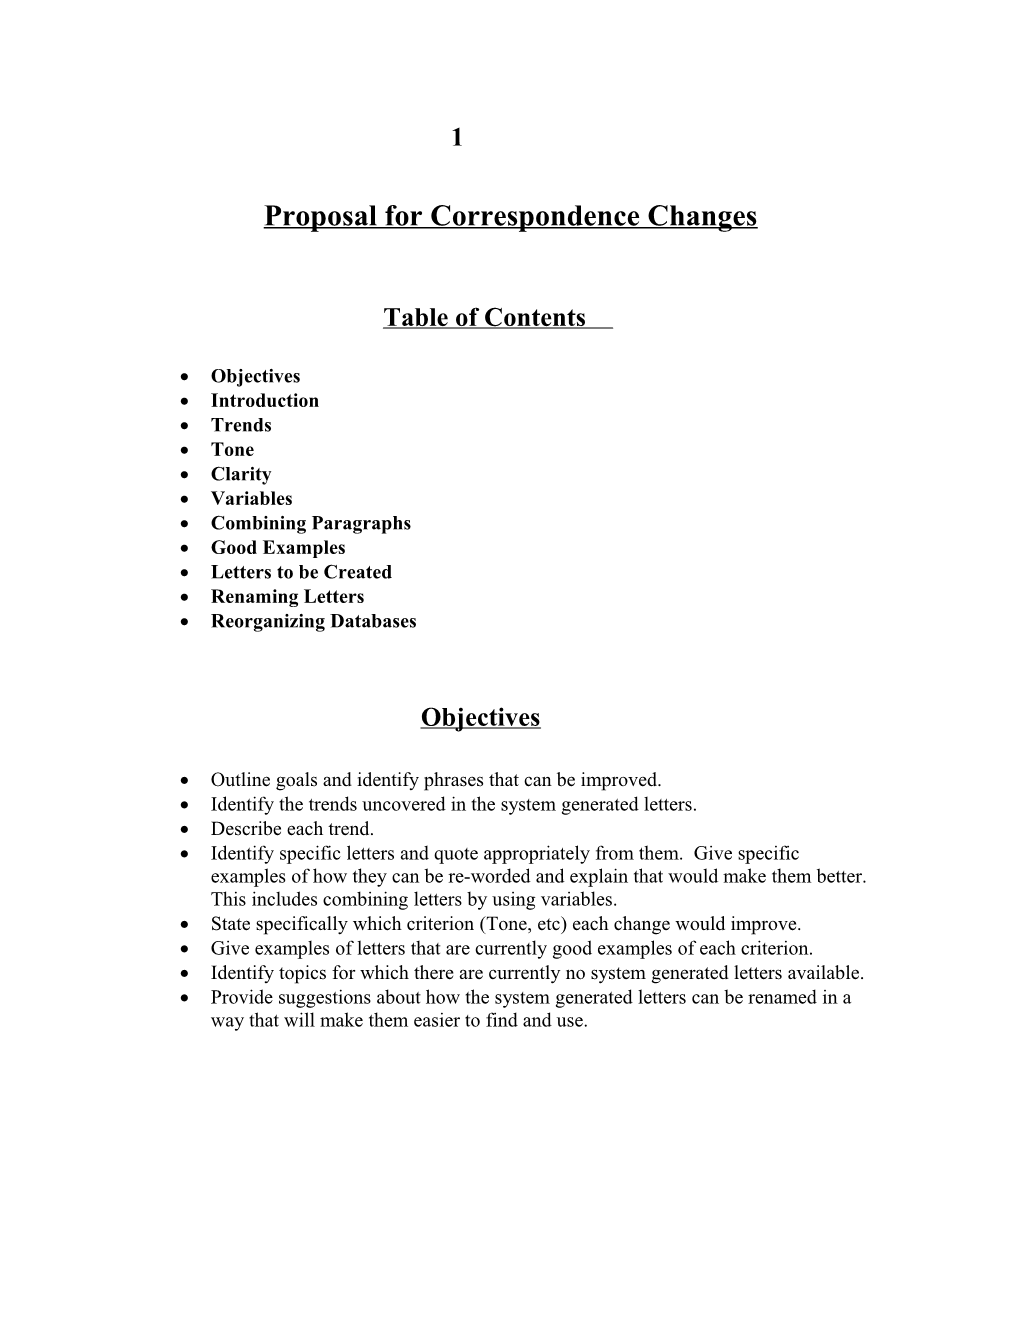 Proposal for Correspondence Changes